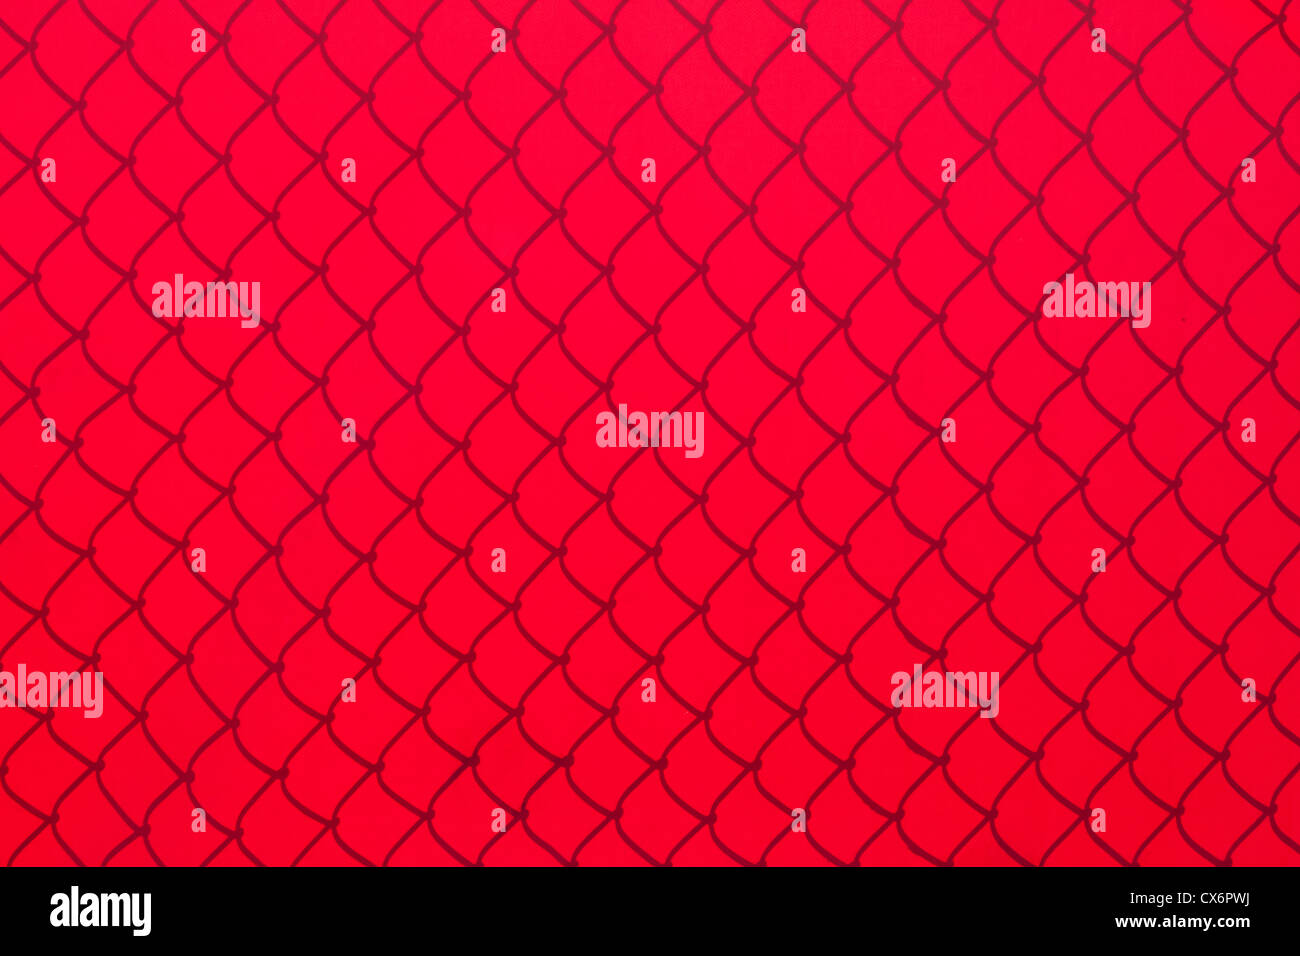 Chainlink Fence Shadow on red Shade Cloth Stock Photo